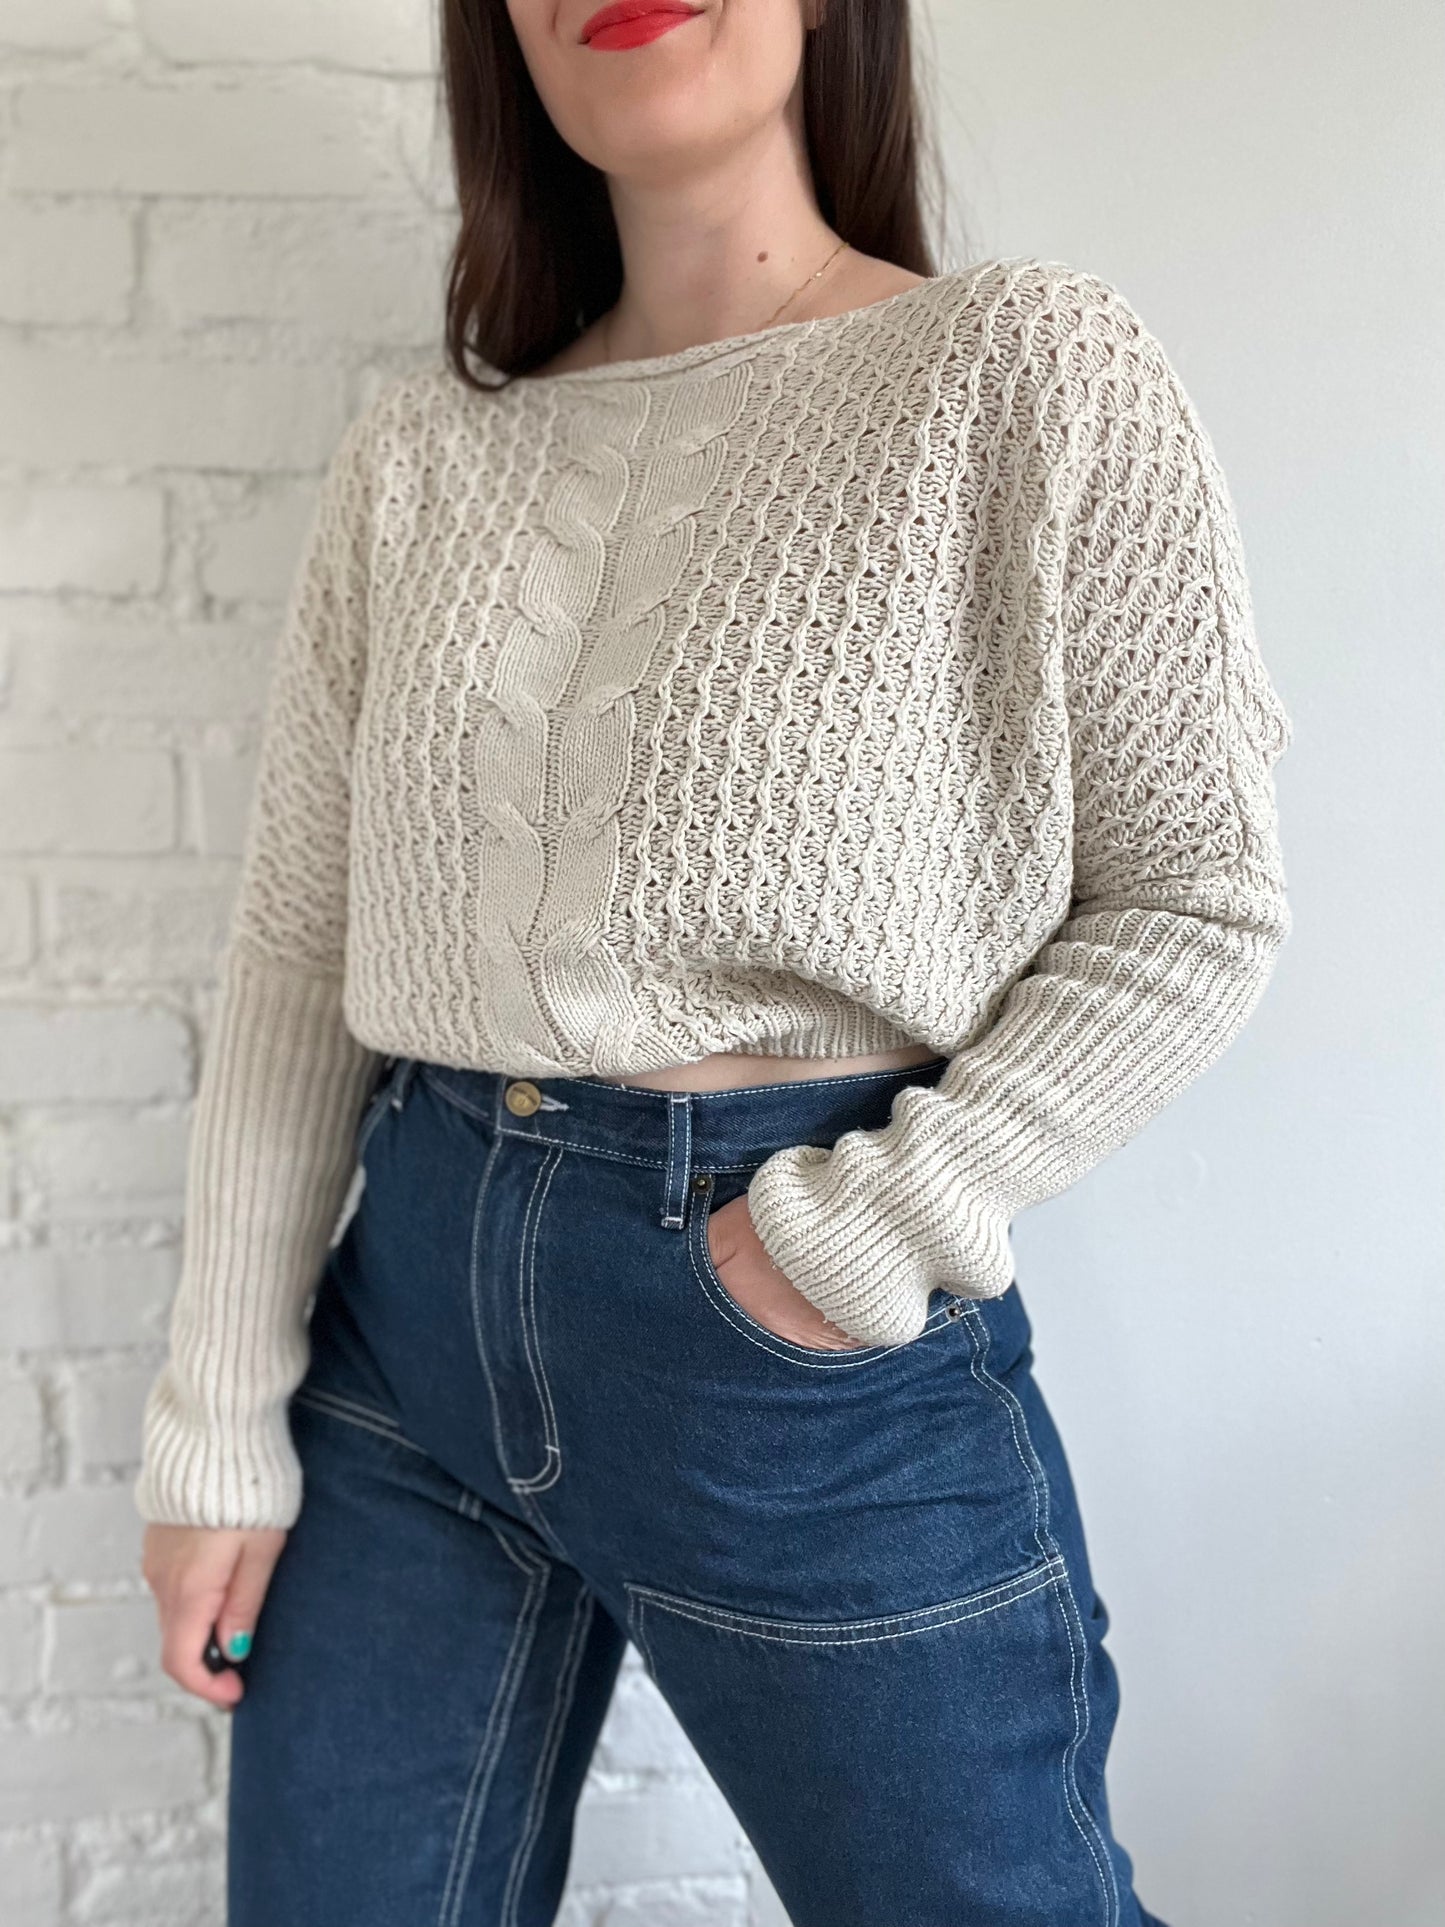 Cropped Lightweight Knit Sweater - S